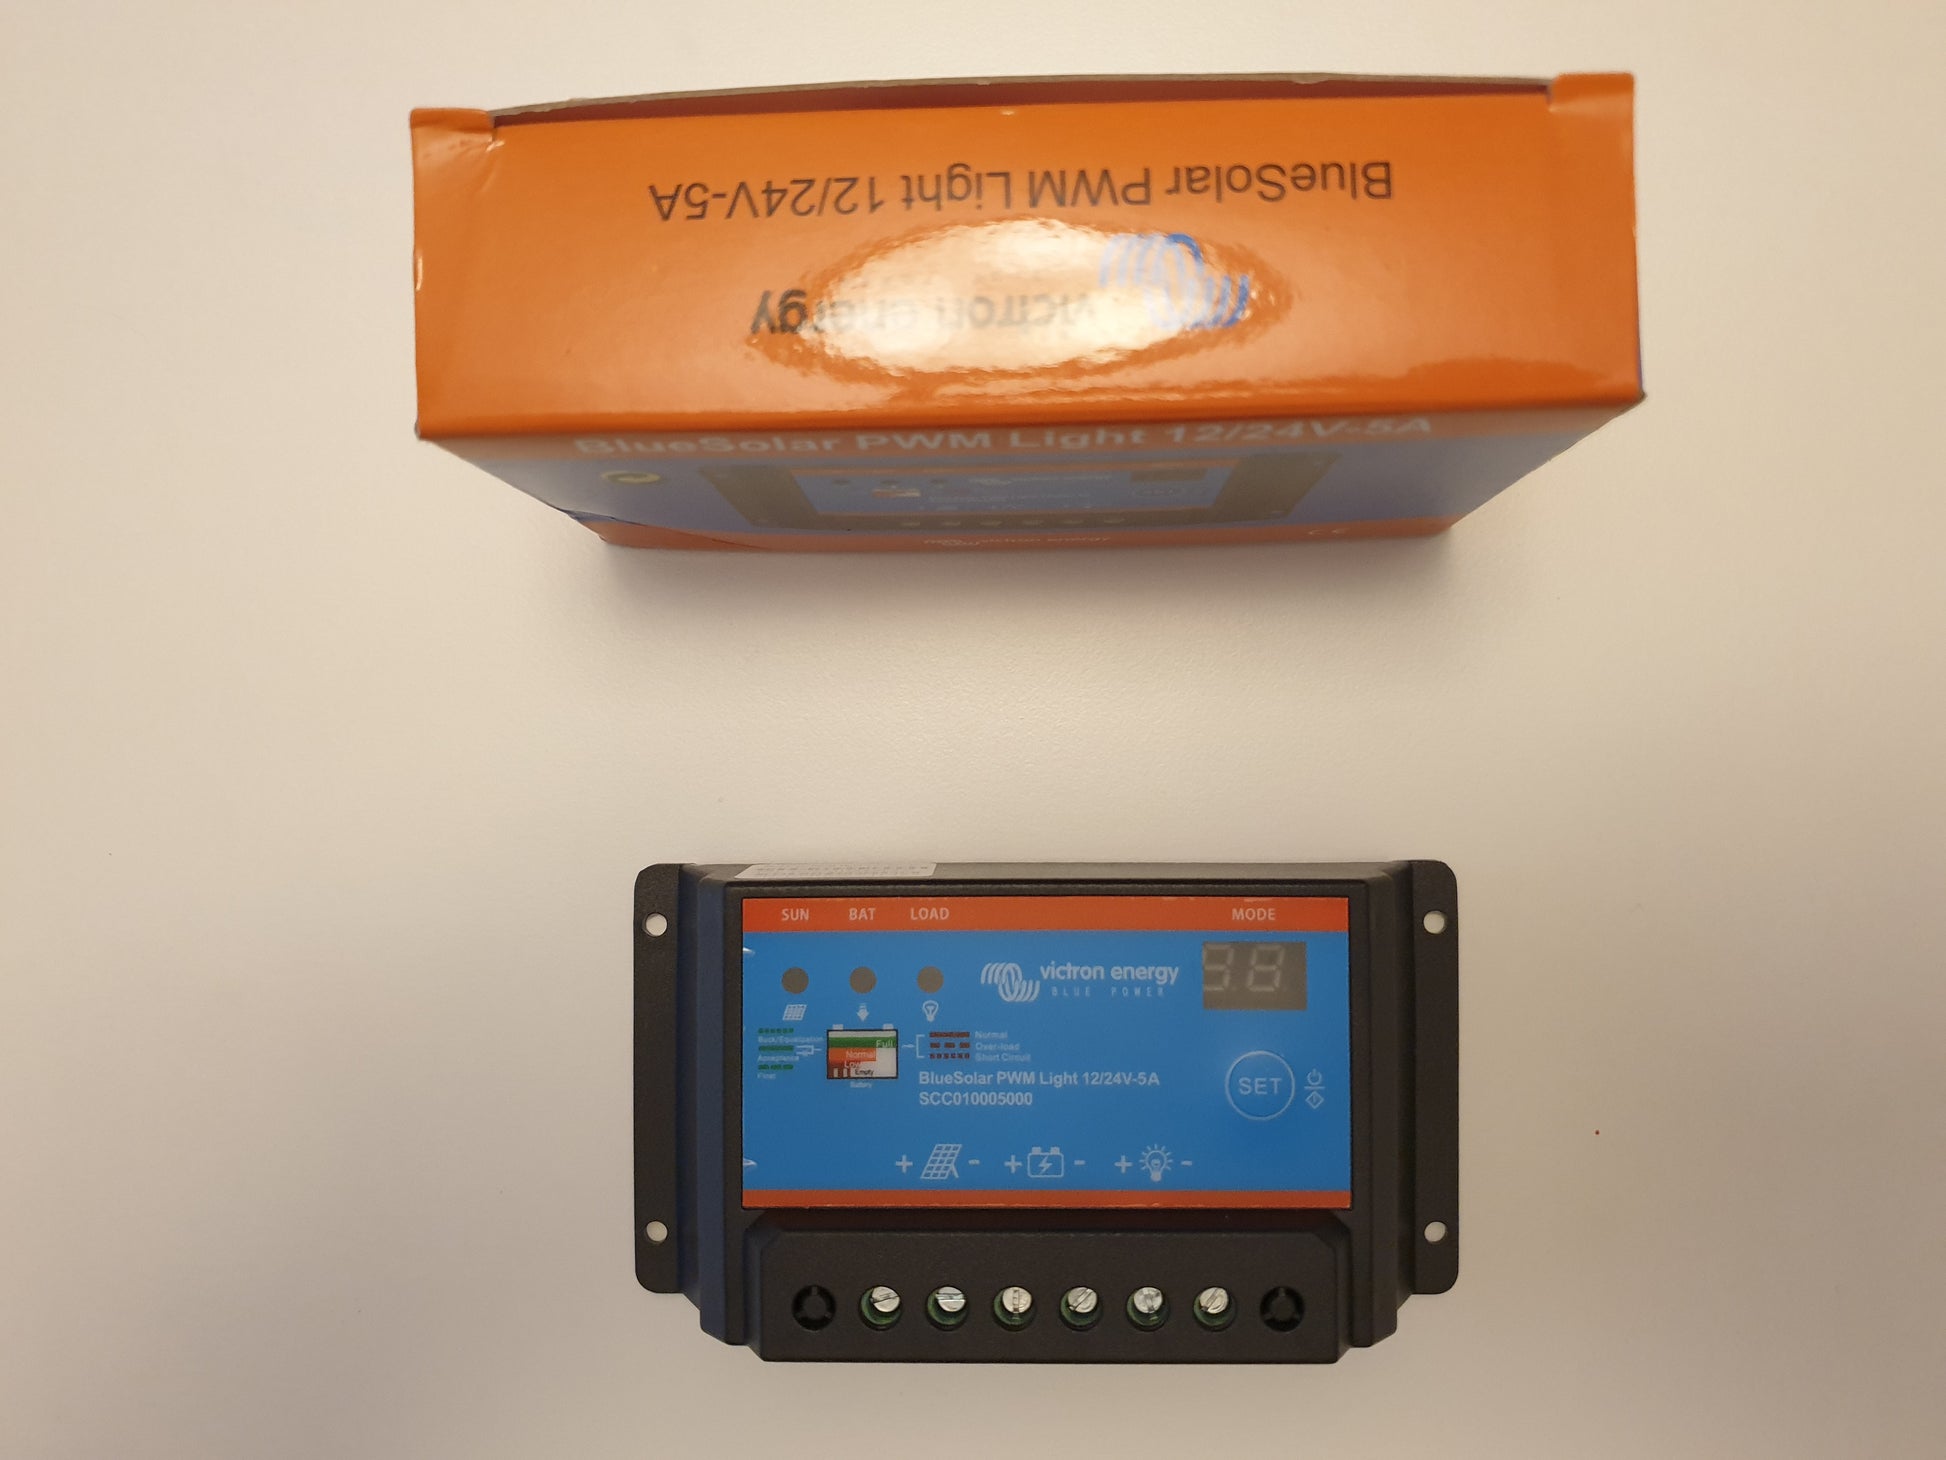 Victron Energy BlueSolar PWM Light Charge Controller 12/24V-5A – Genergizer